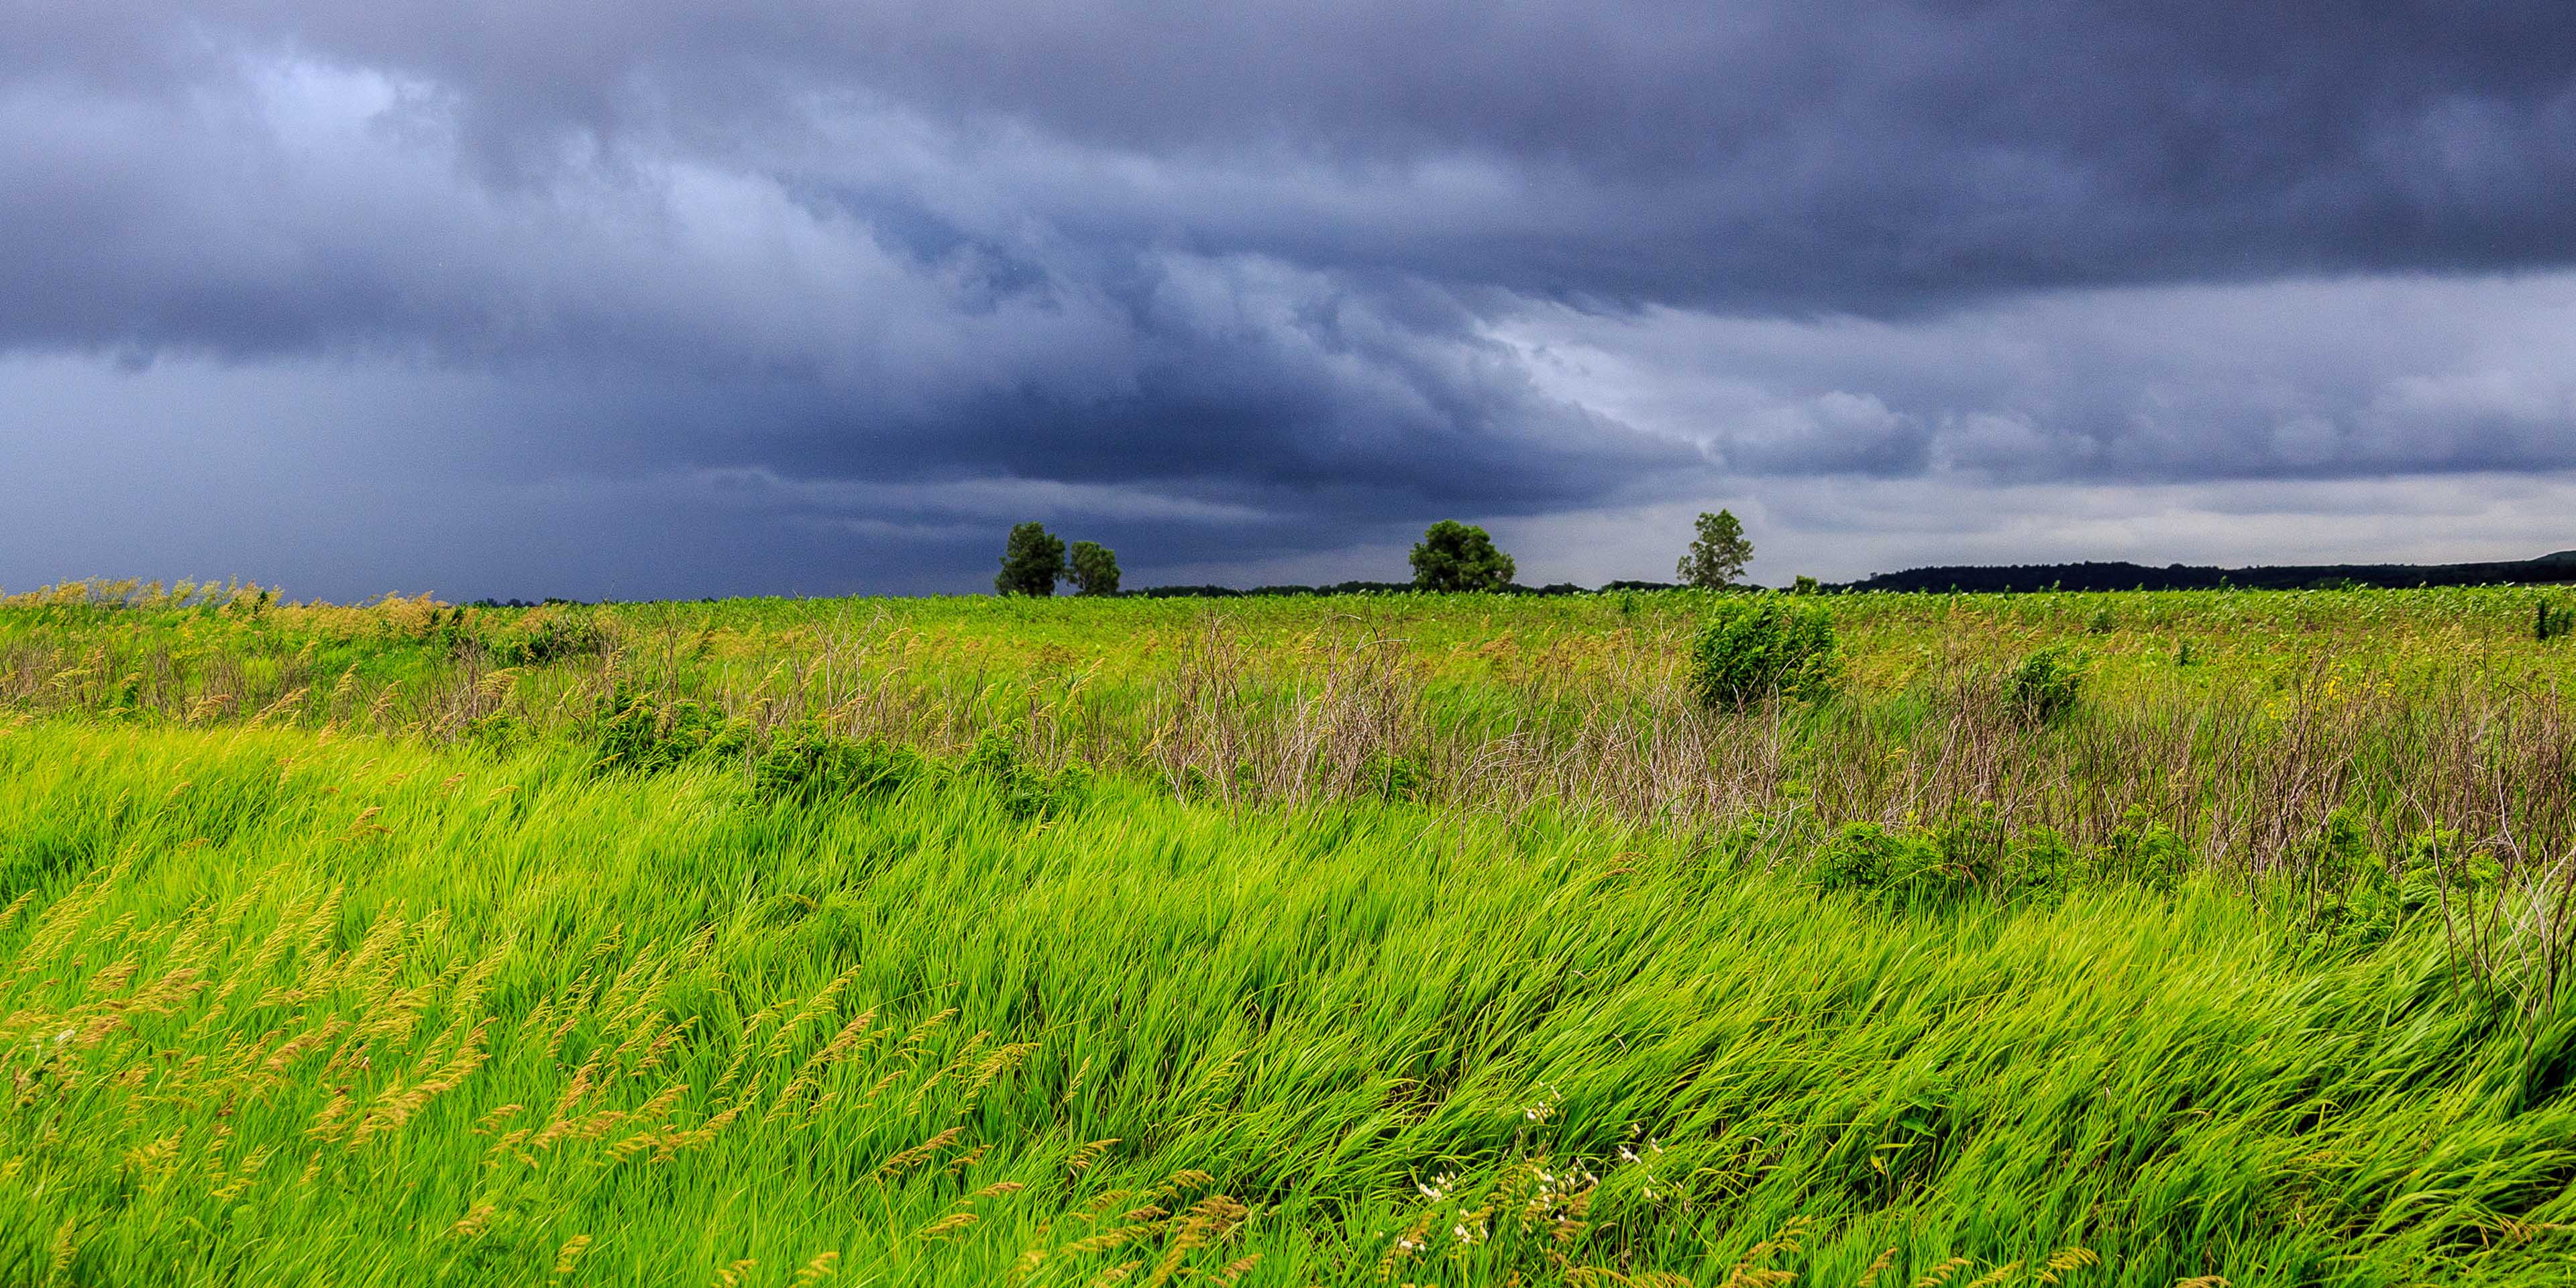 Thunderstorm building in the distance with green field and trees in the foreground.